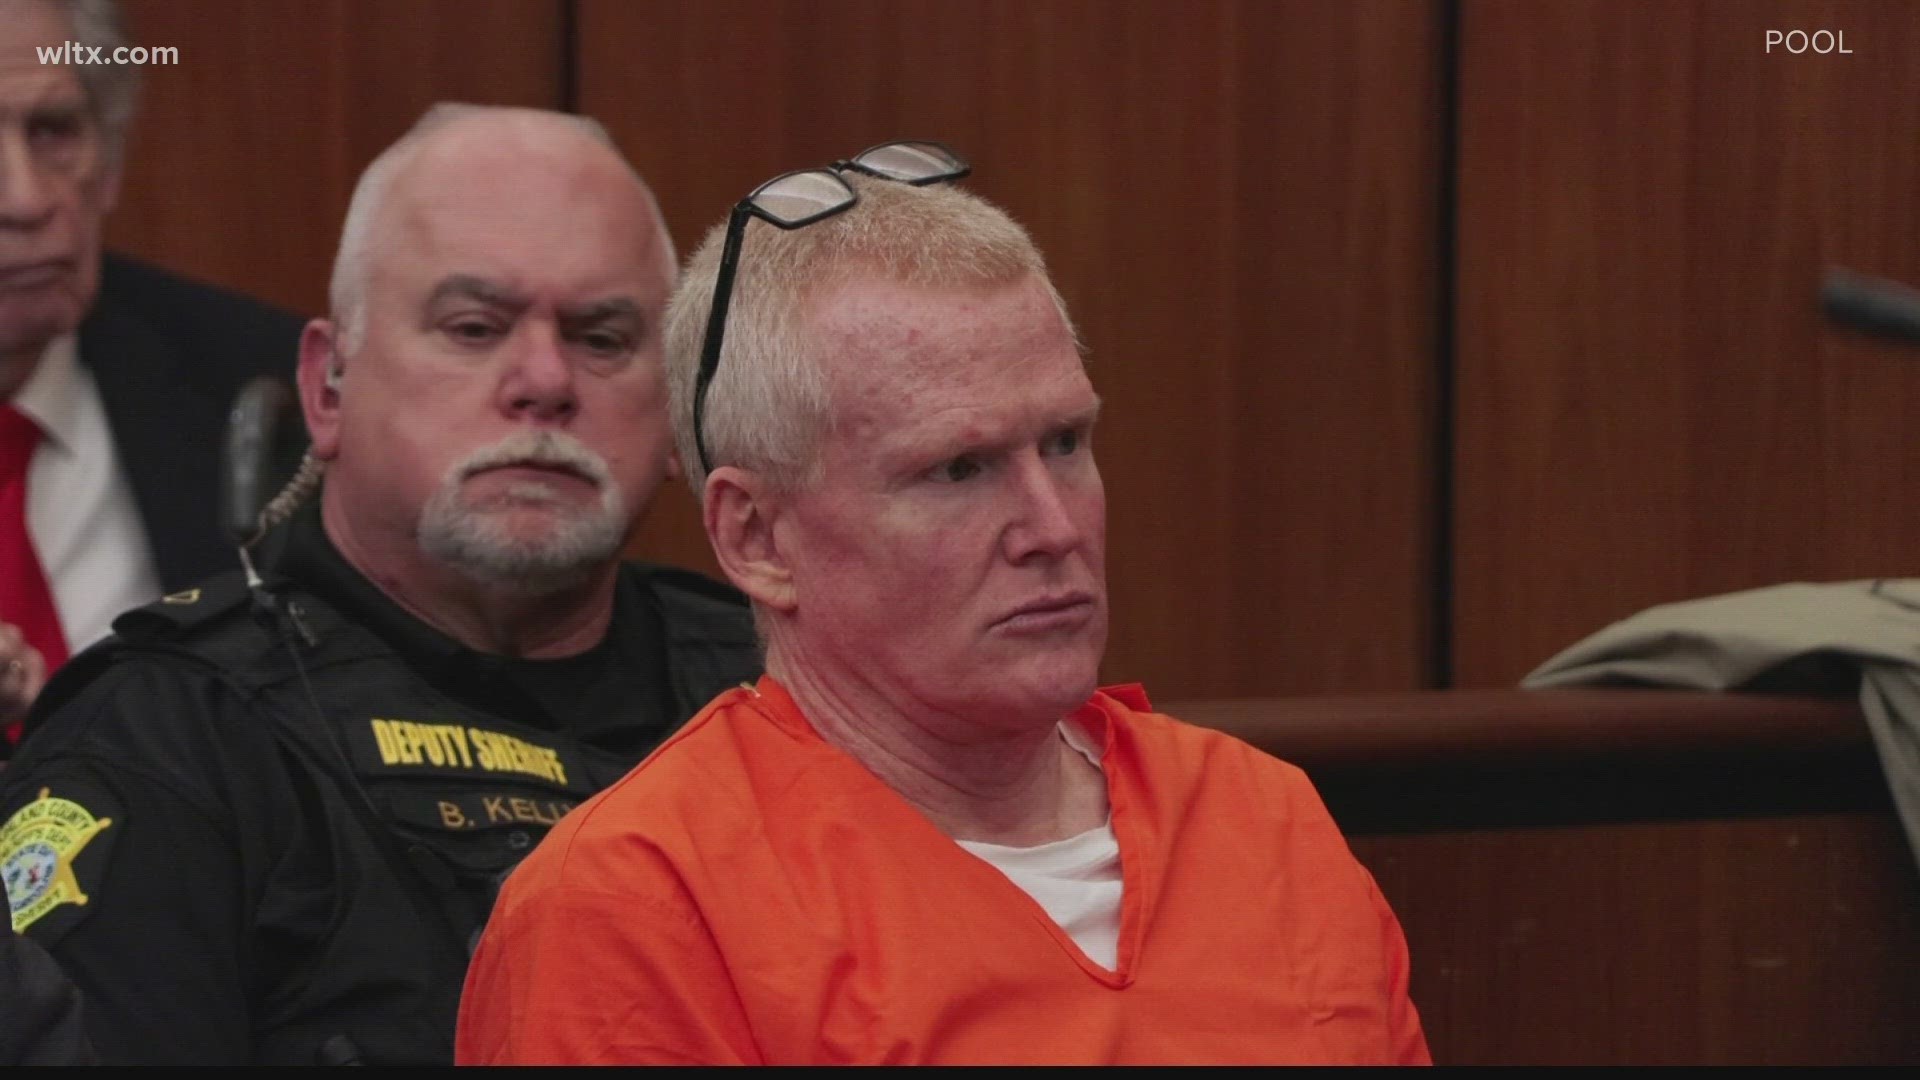 Convicted murderer Alex Murdaugh was back in court Tuesday for the next step in his attorneys' effort to throw out his murder convictions and get him a new trial.